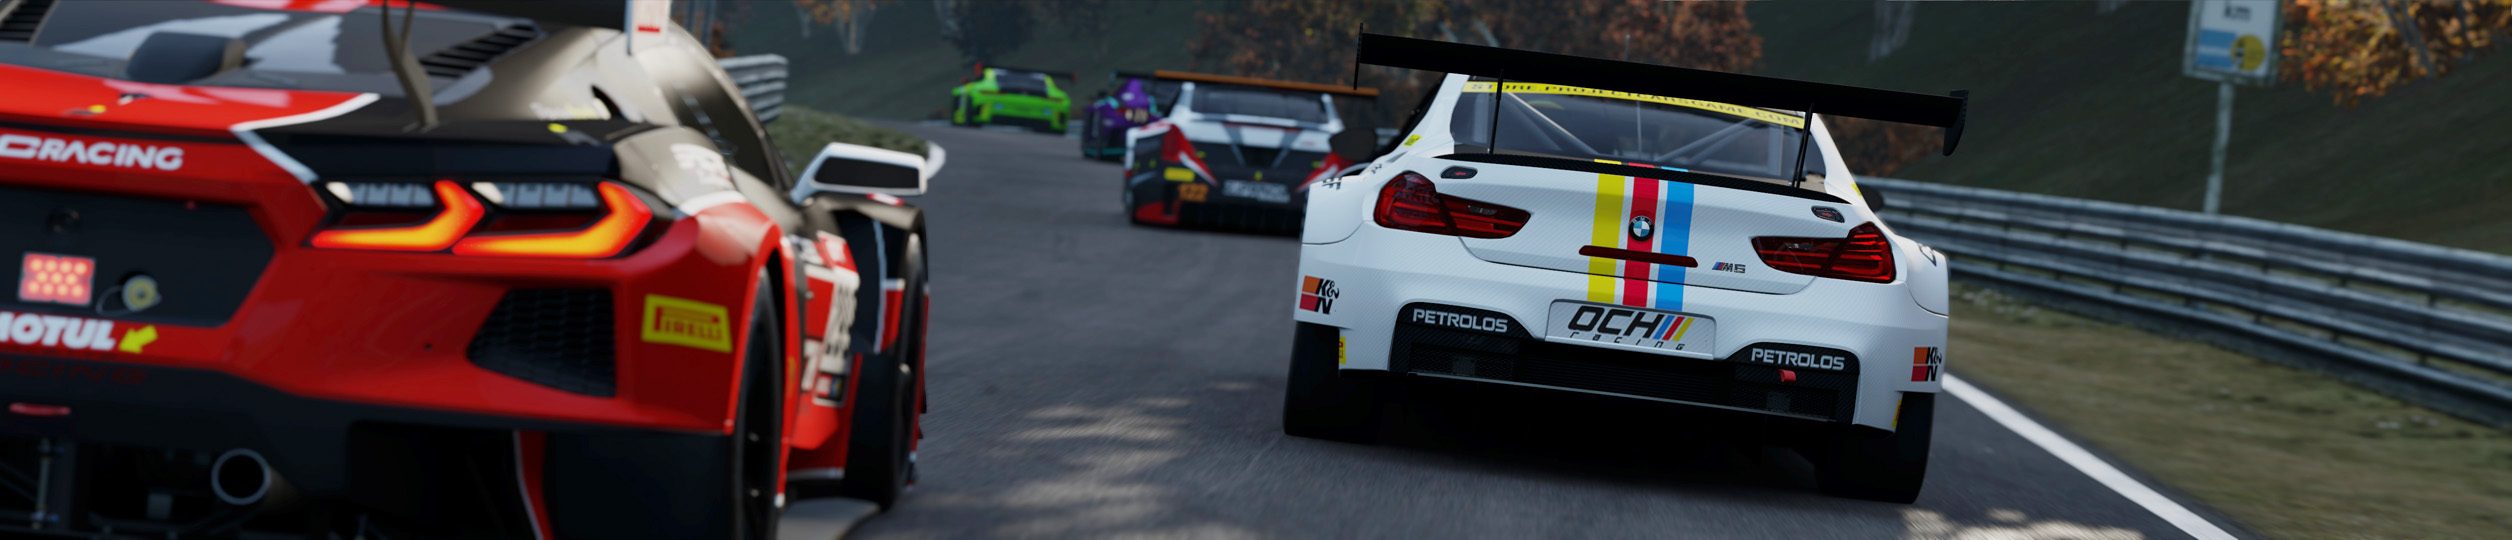 3 PROJECT CARS 3 GT3 at NORDSCHLEIFE crop copy.jpg